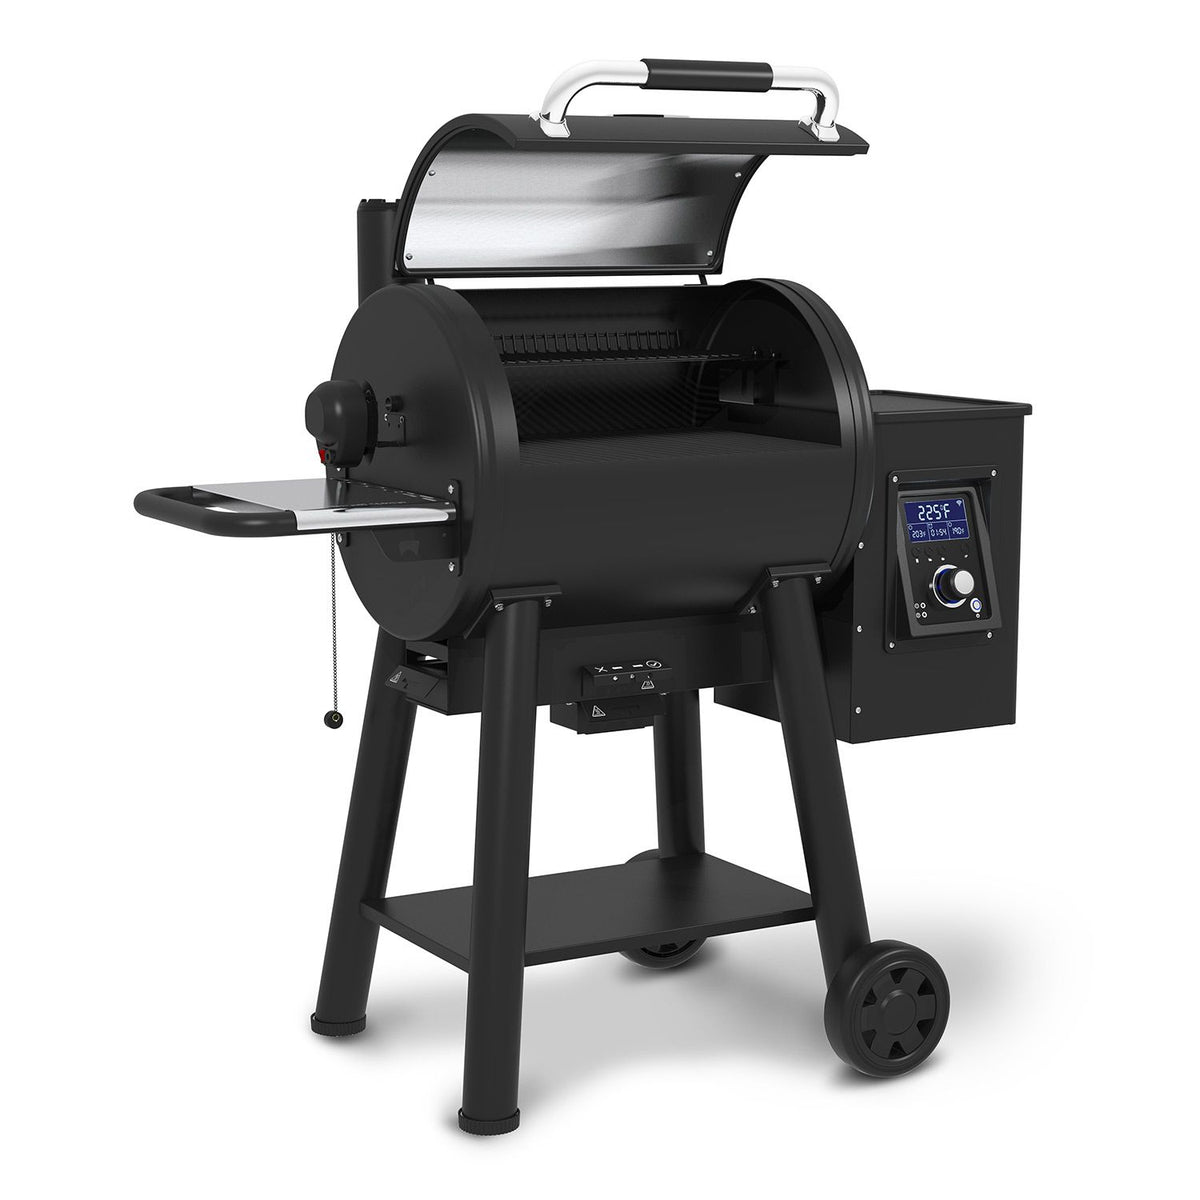 Broil King Regal Pellet 400 Smoker and Grill Angled VIew Open Lid